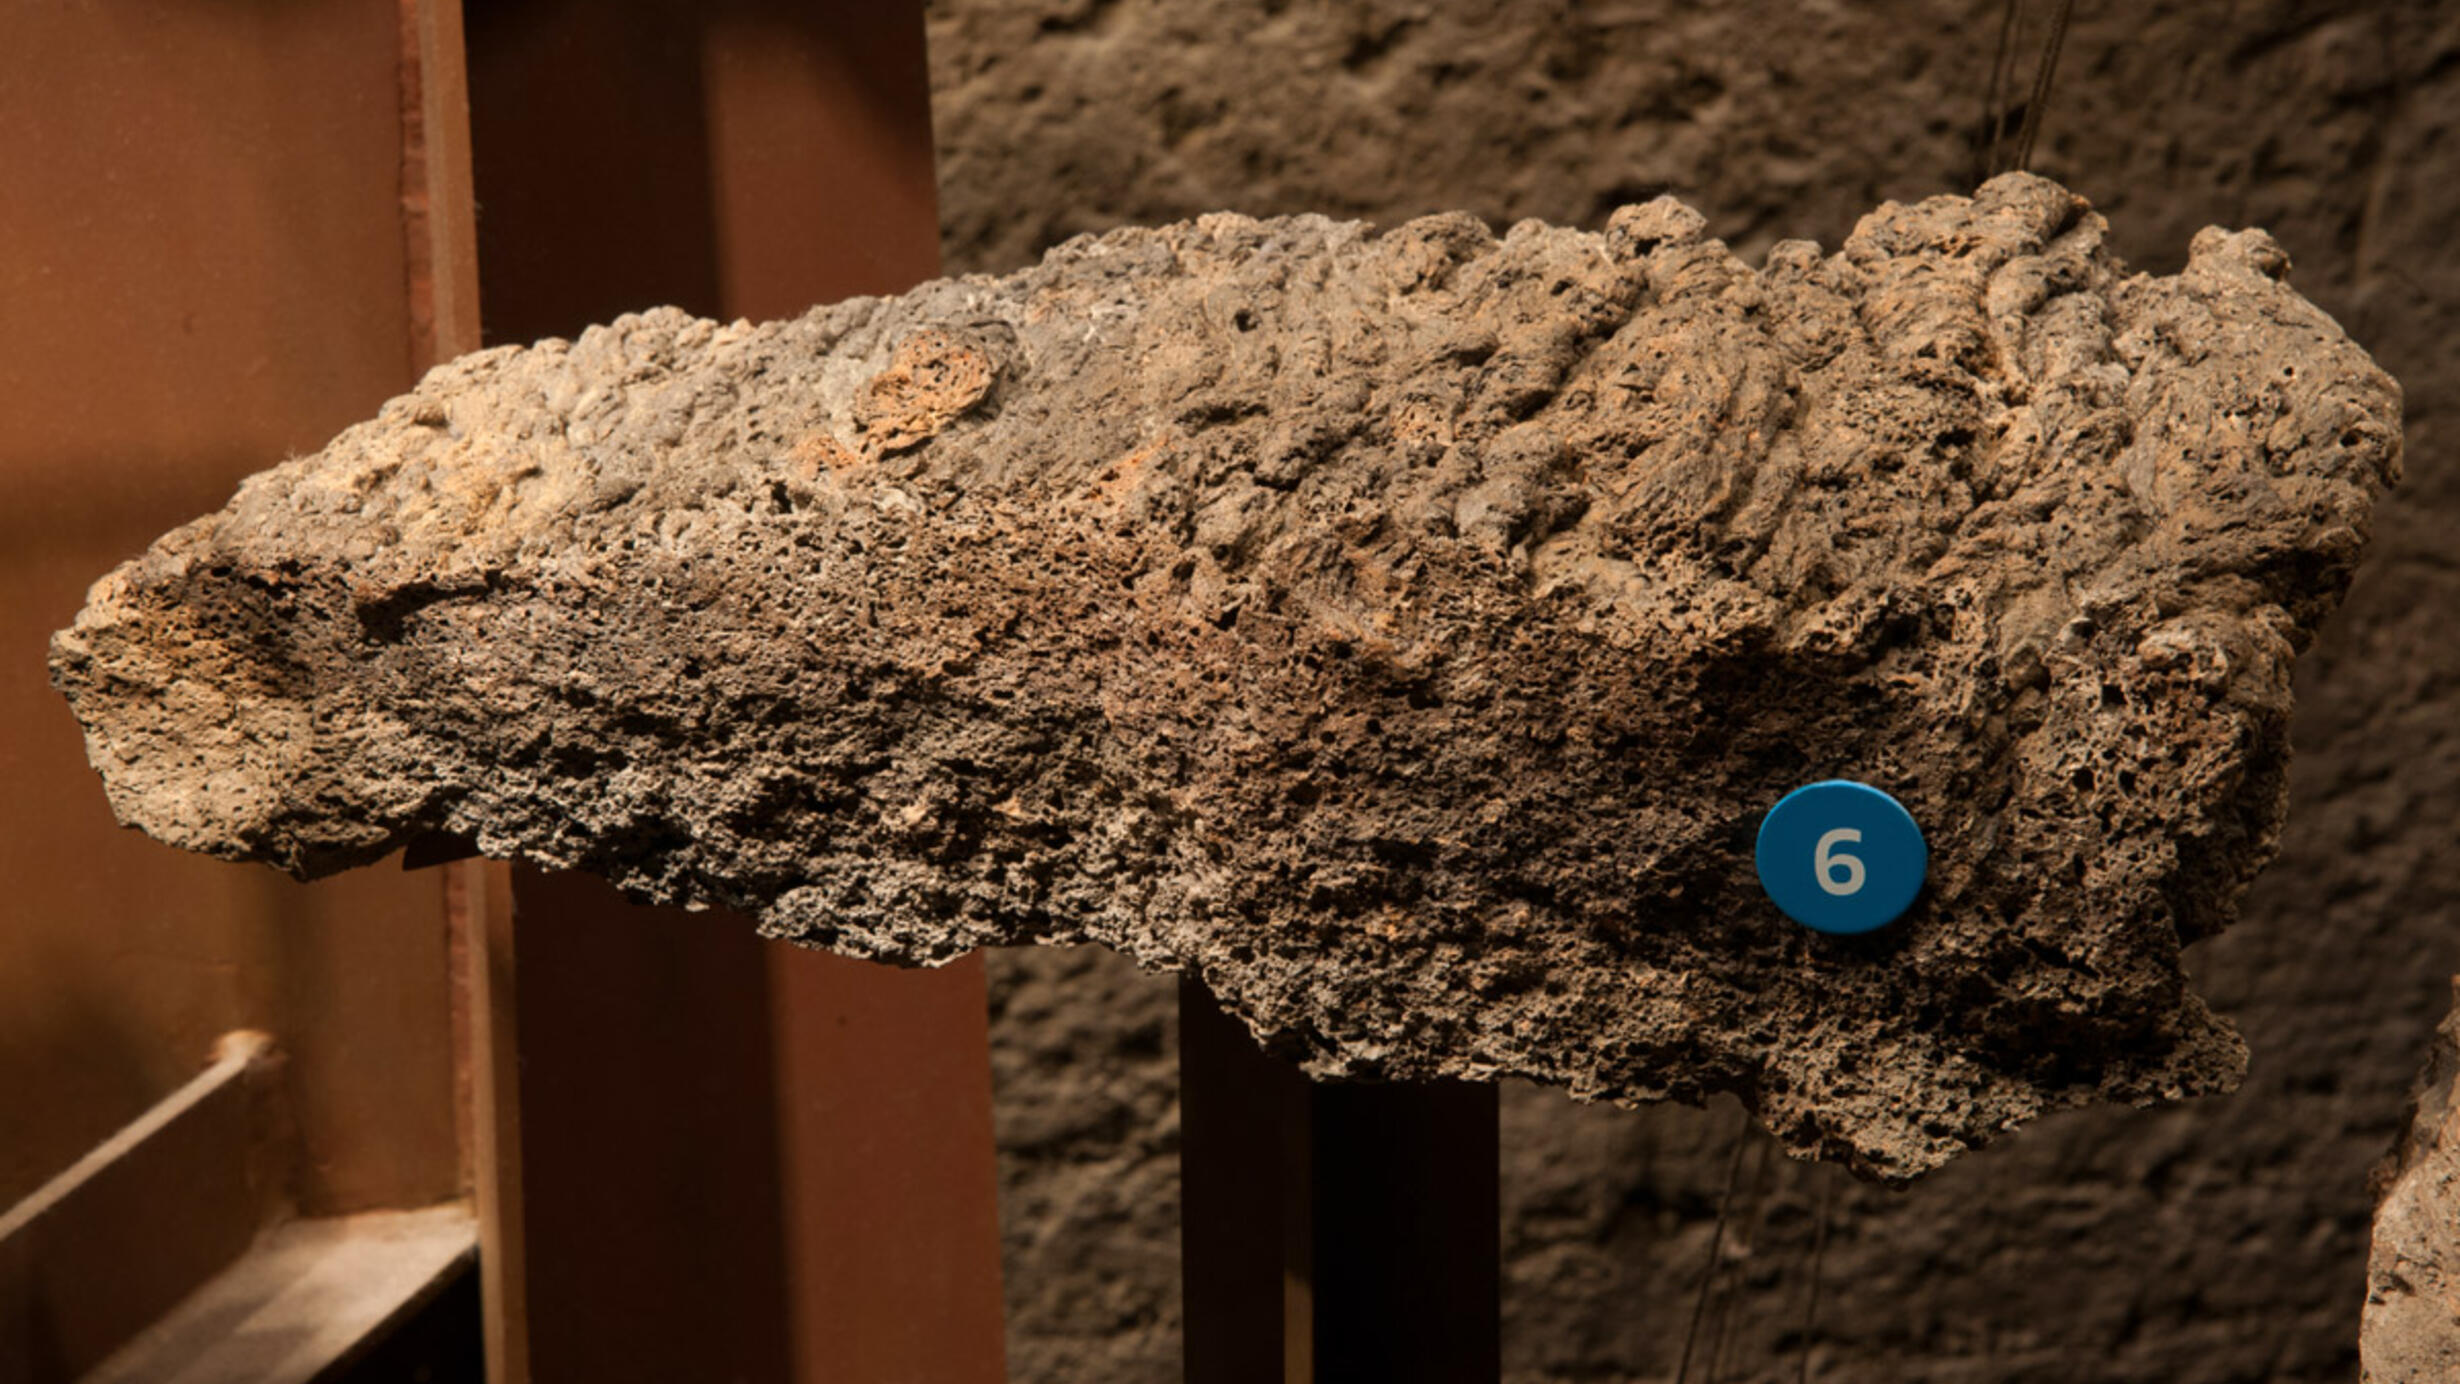 A basalt tablet, a specimen with a number six marker on it, in the Museum’s Hall of Planet Earth. Appears as long bumpy pitted section of rock.